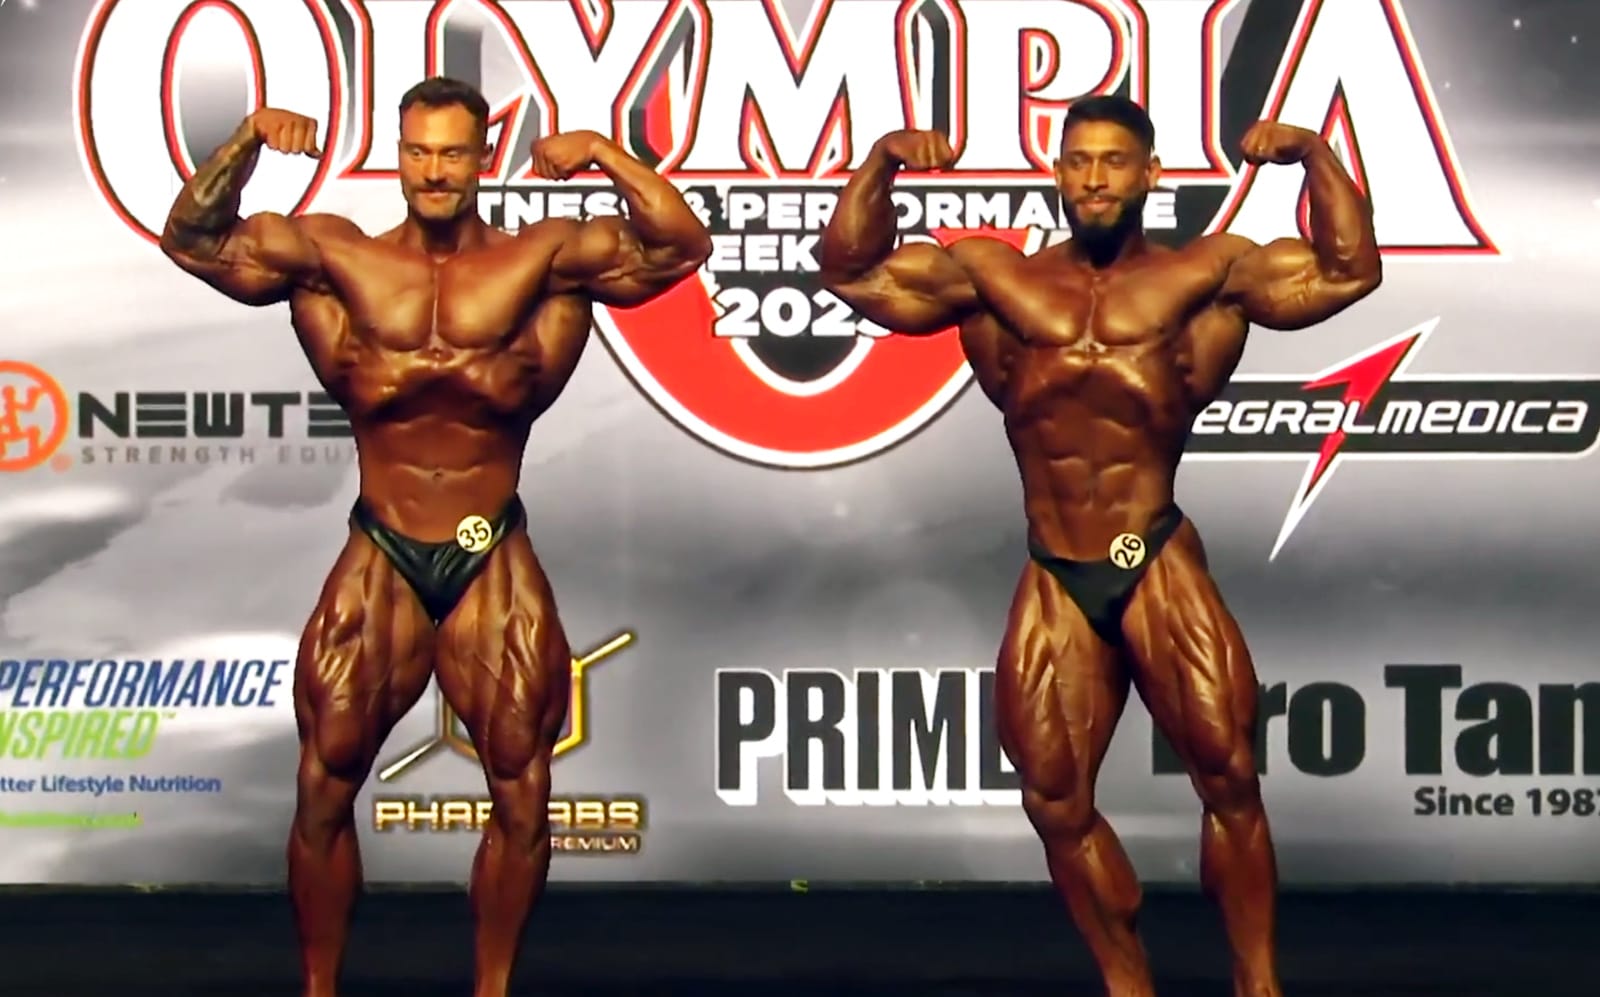 Poll: Fans More Excited About Classic Physique Olympia Than Mr